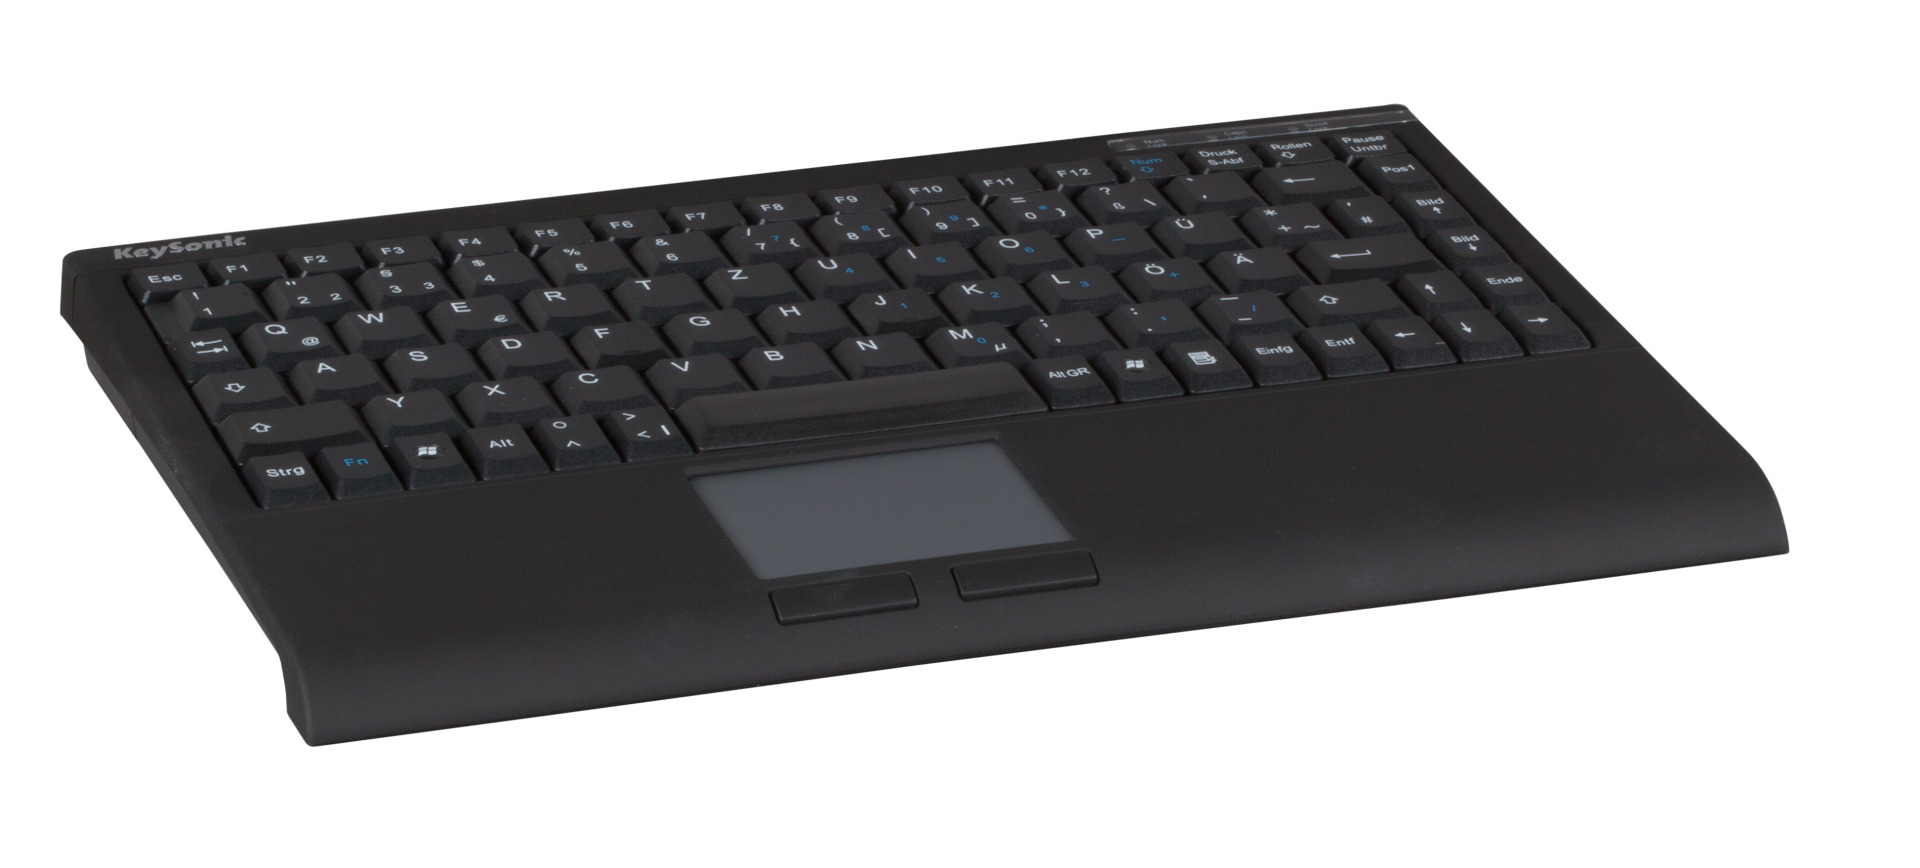 Mini Keyboard with Integrated Touchpad